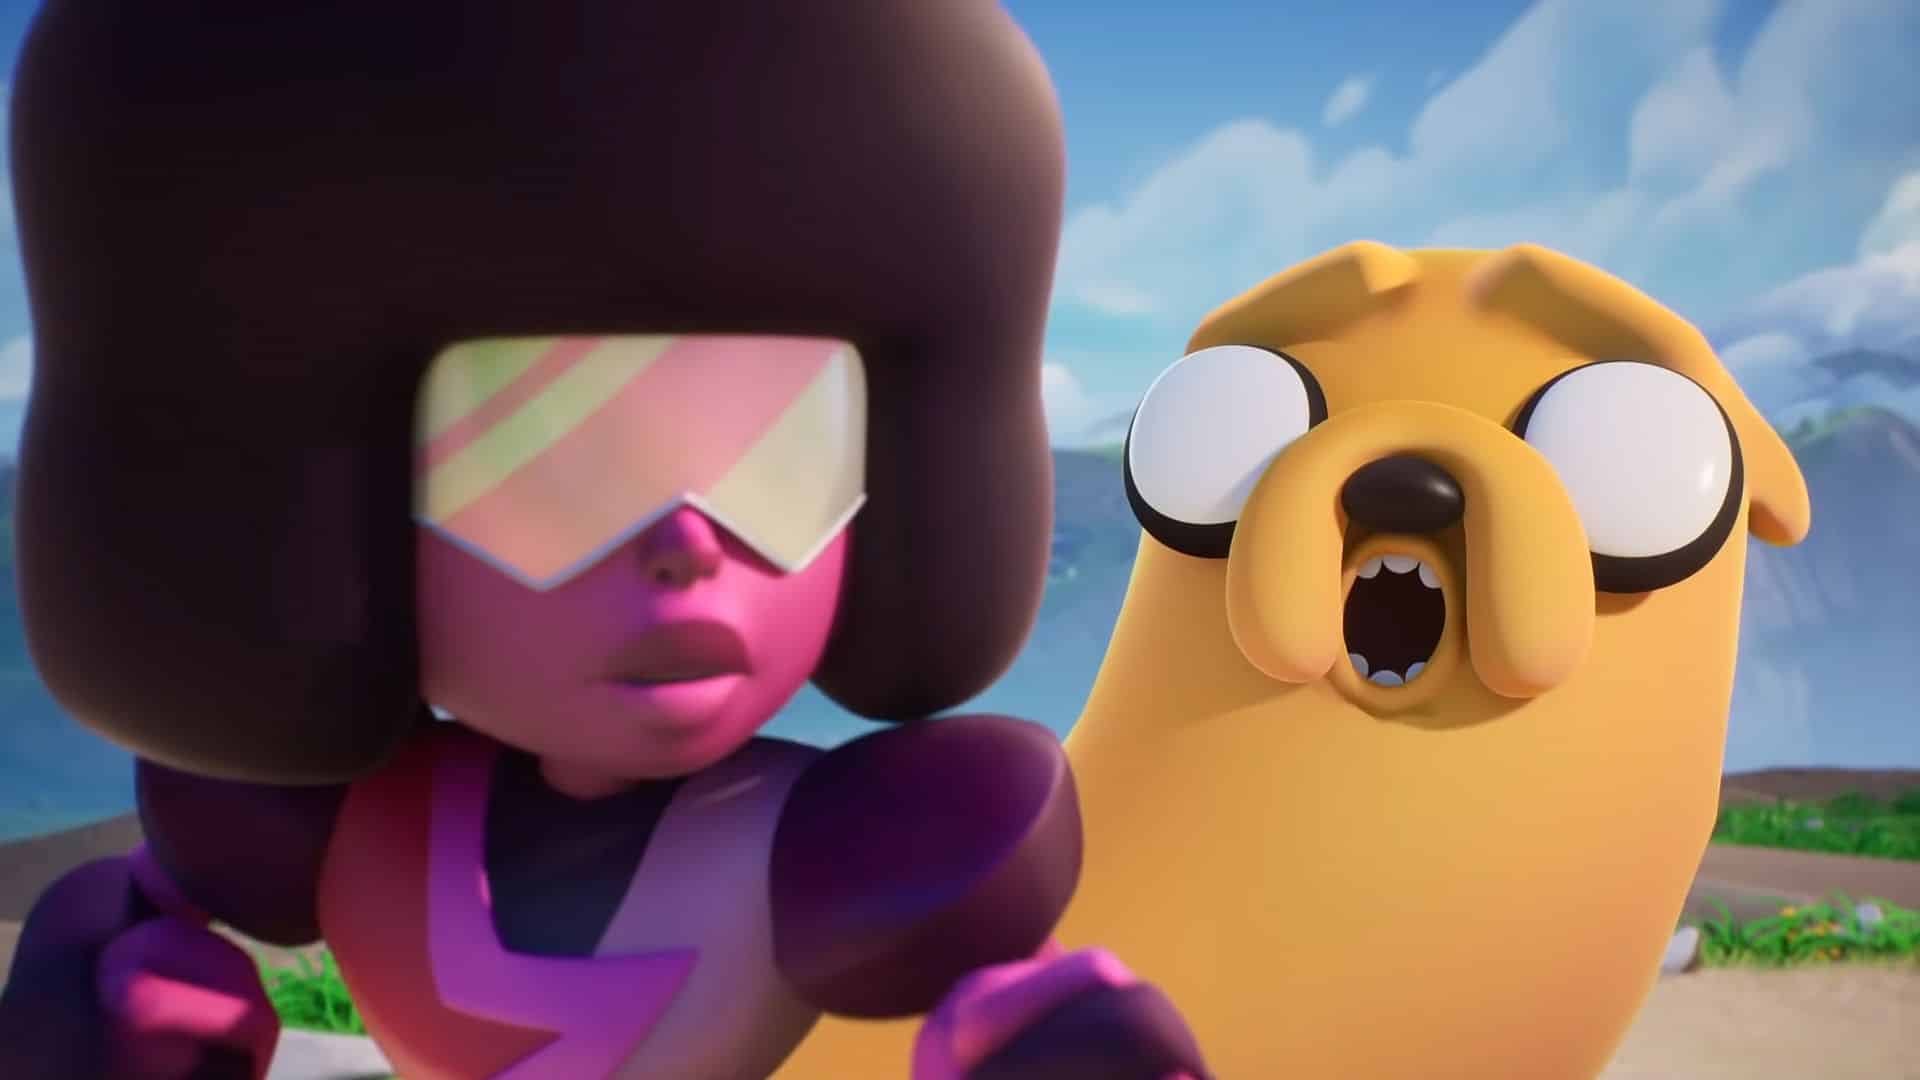 jake the dog expression in multiversus